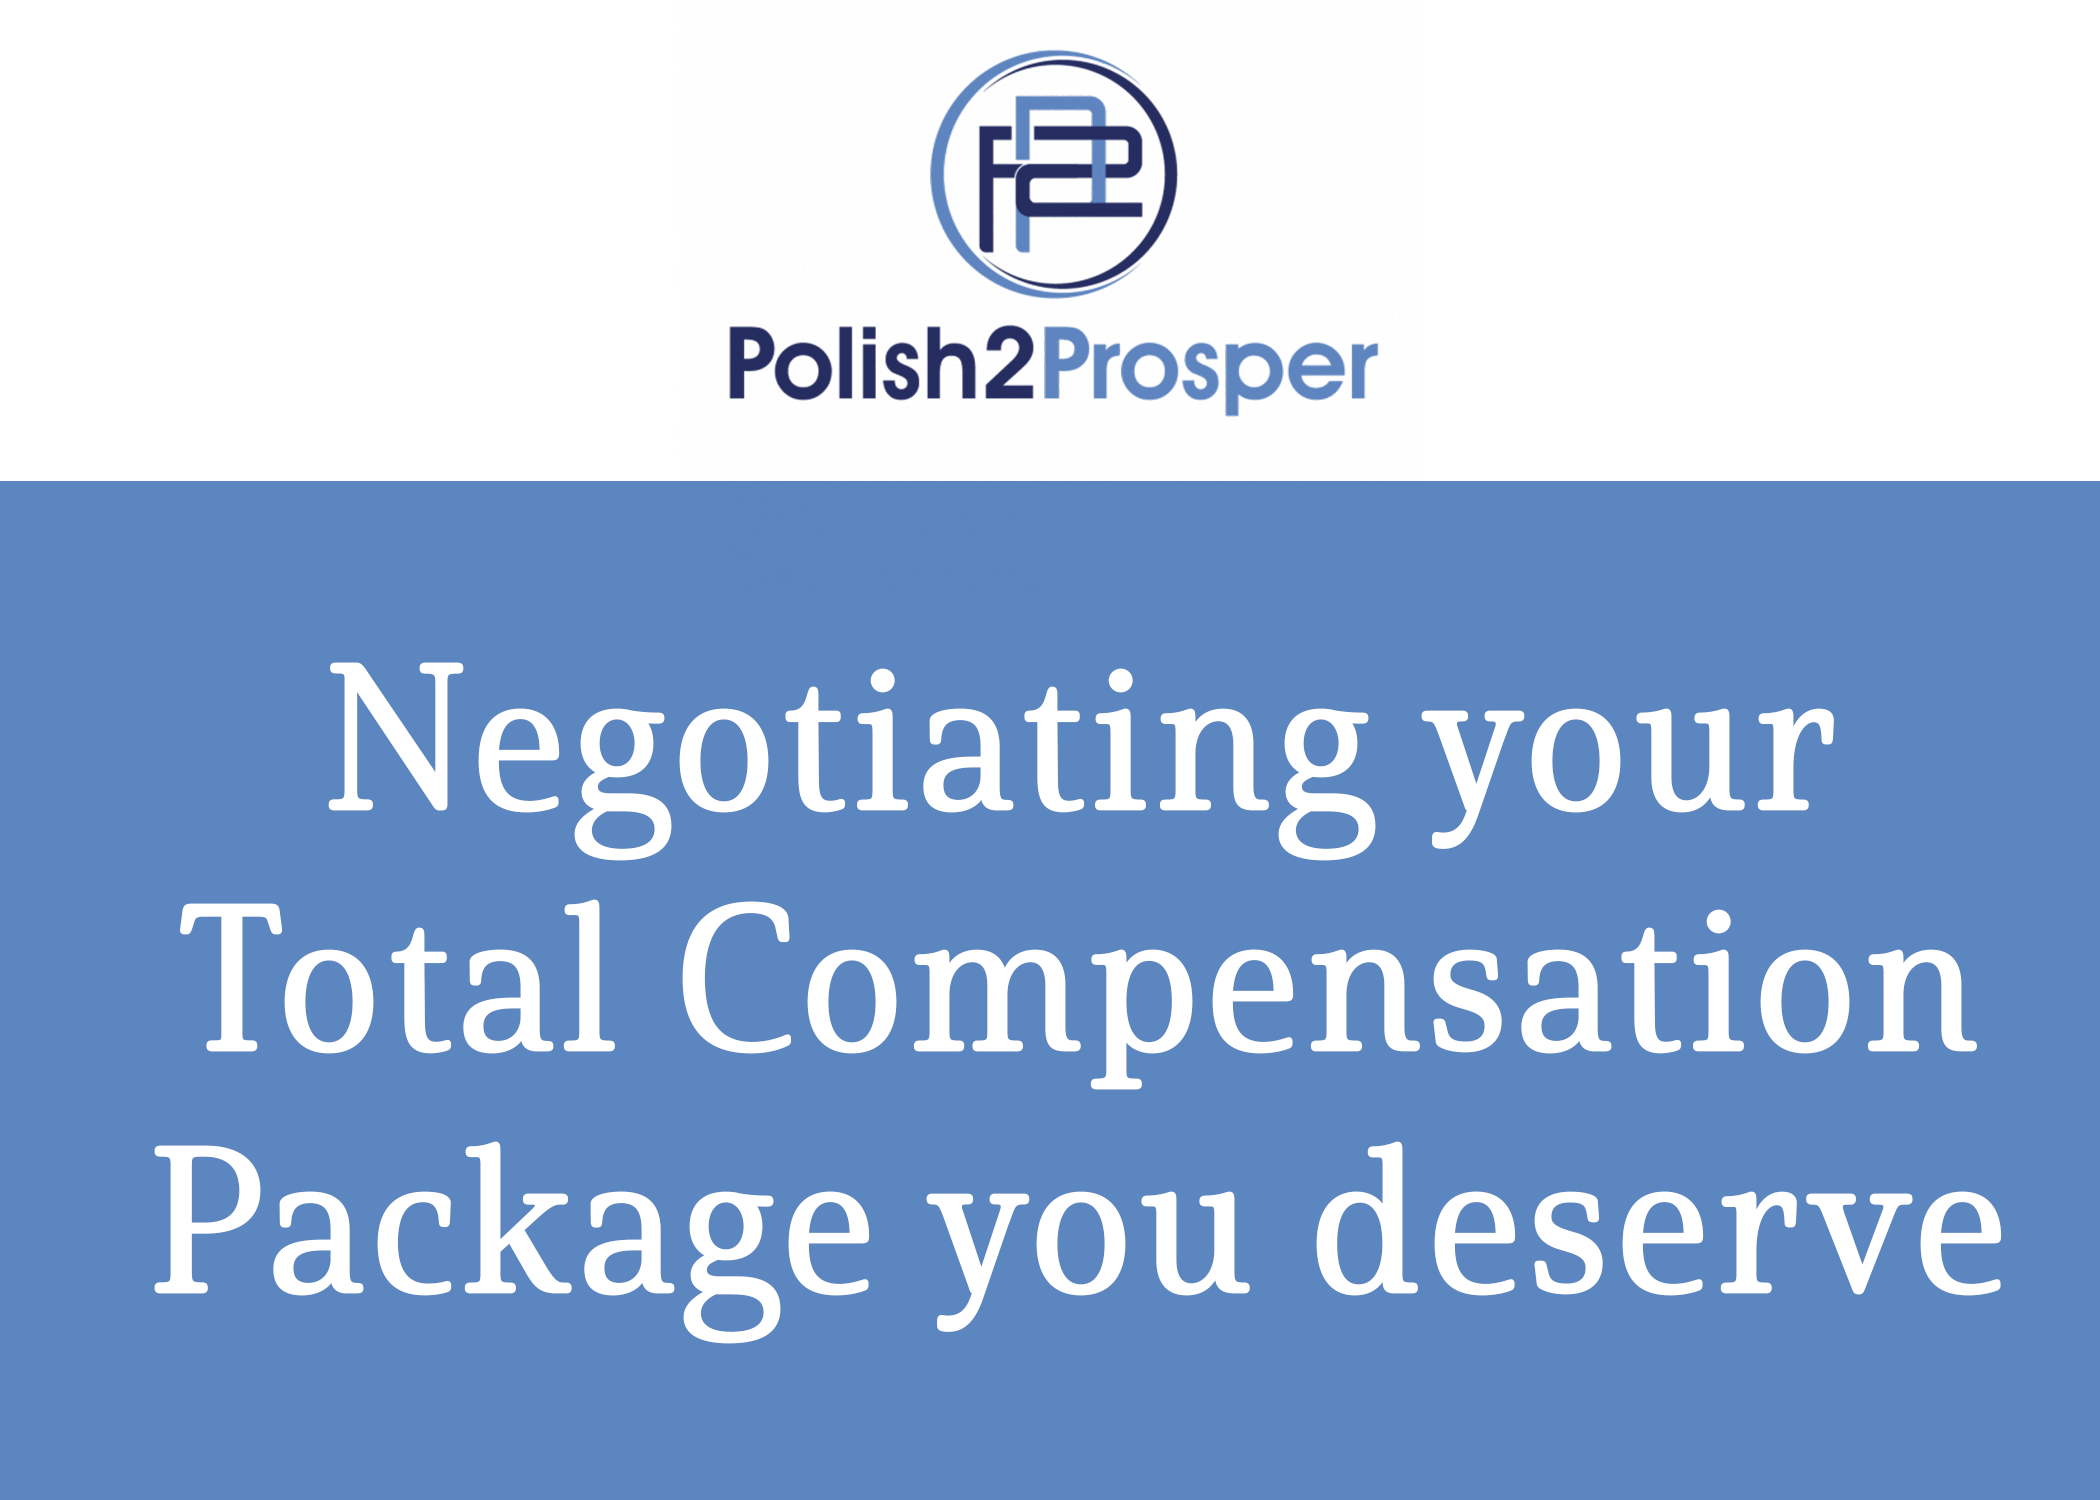 Negotiating your Total Compensation Package you deserve